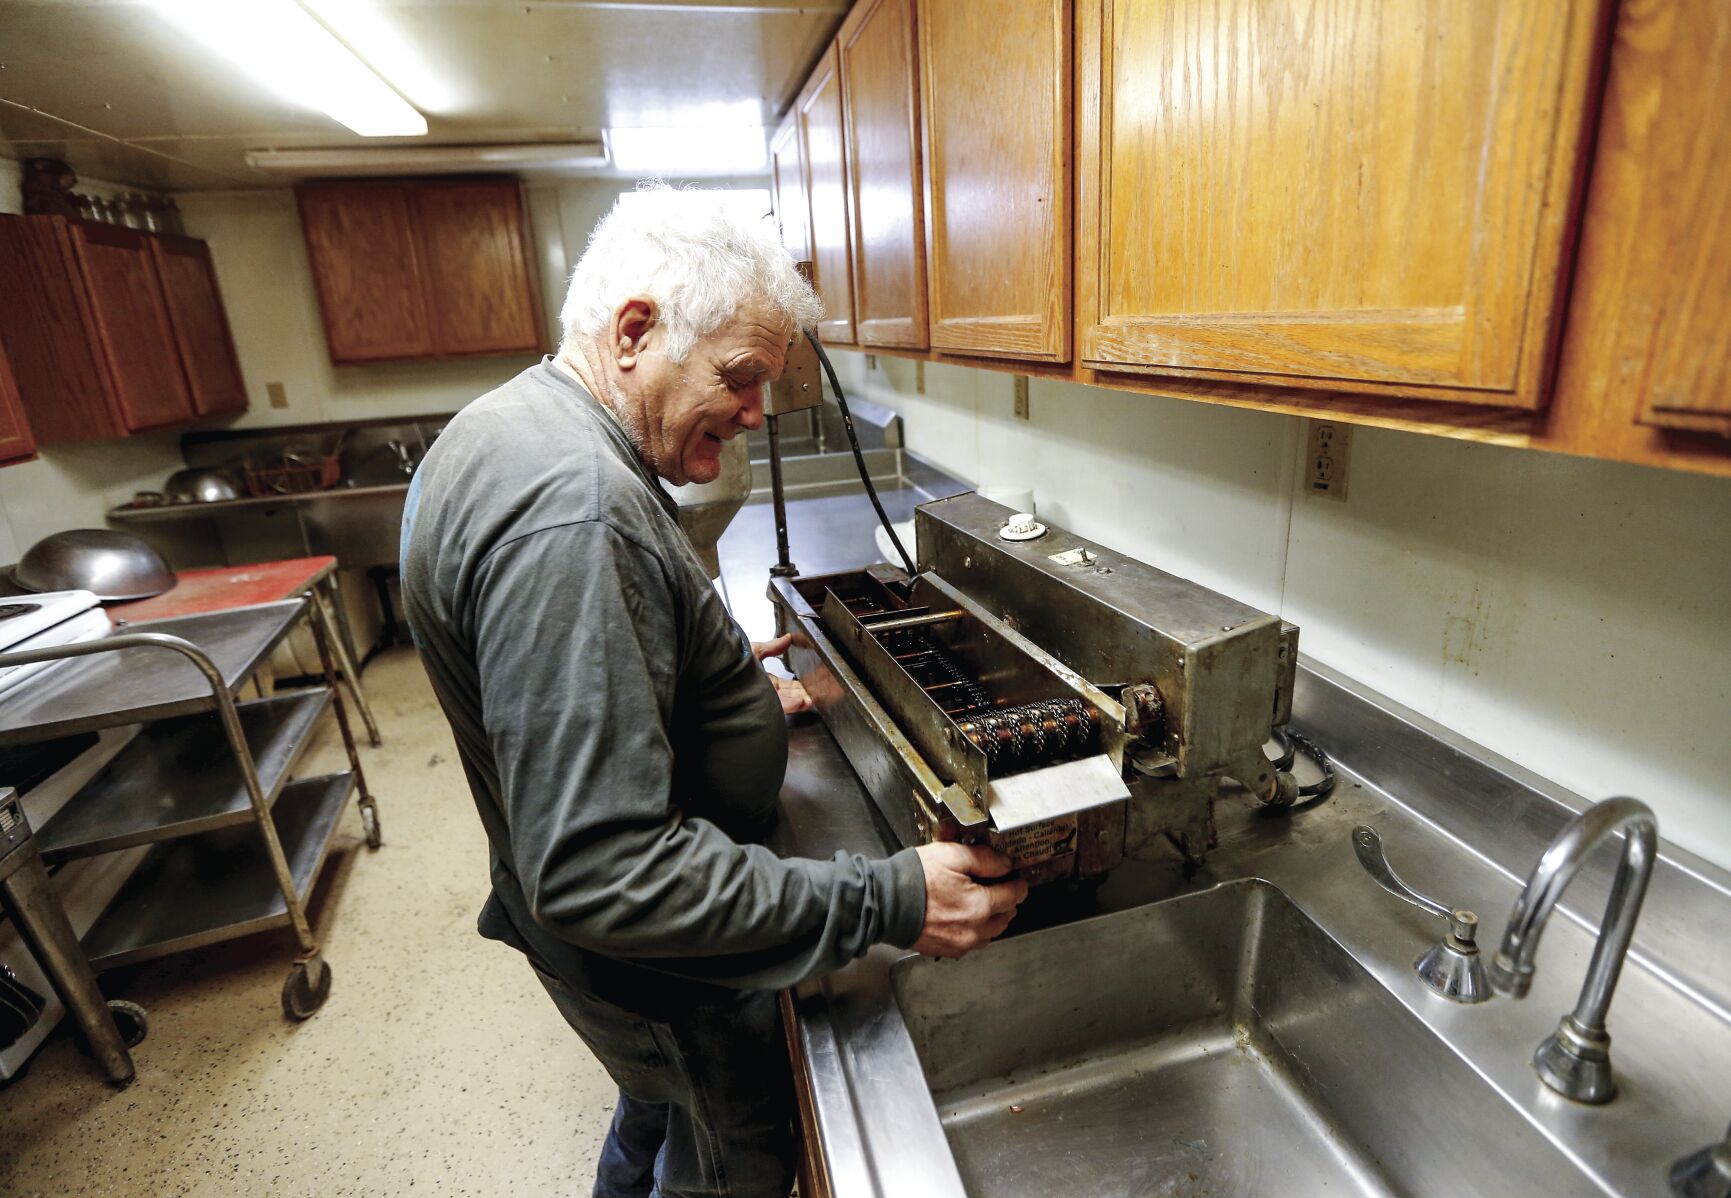 Walter Hammerand of Fennimore, Wis., cleans his donut maker that he uses to make fresh doughnuts at the farmers market.    PHOTO CREDIT: Dave Kettering
Telegraph Herald